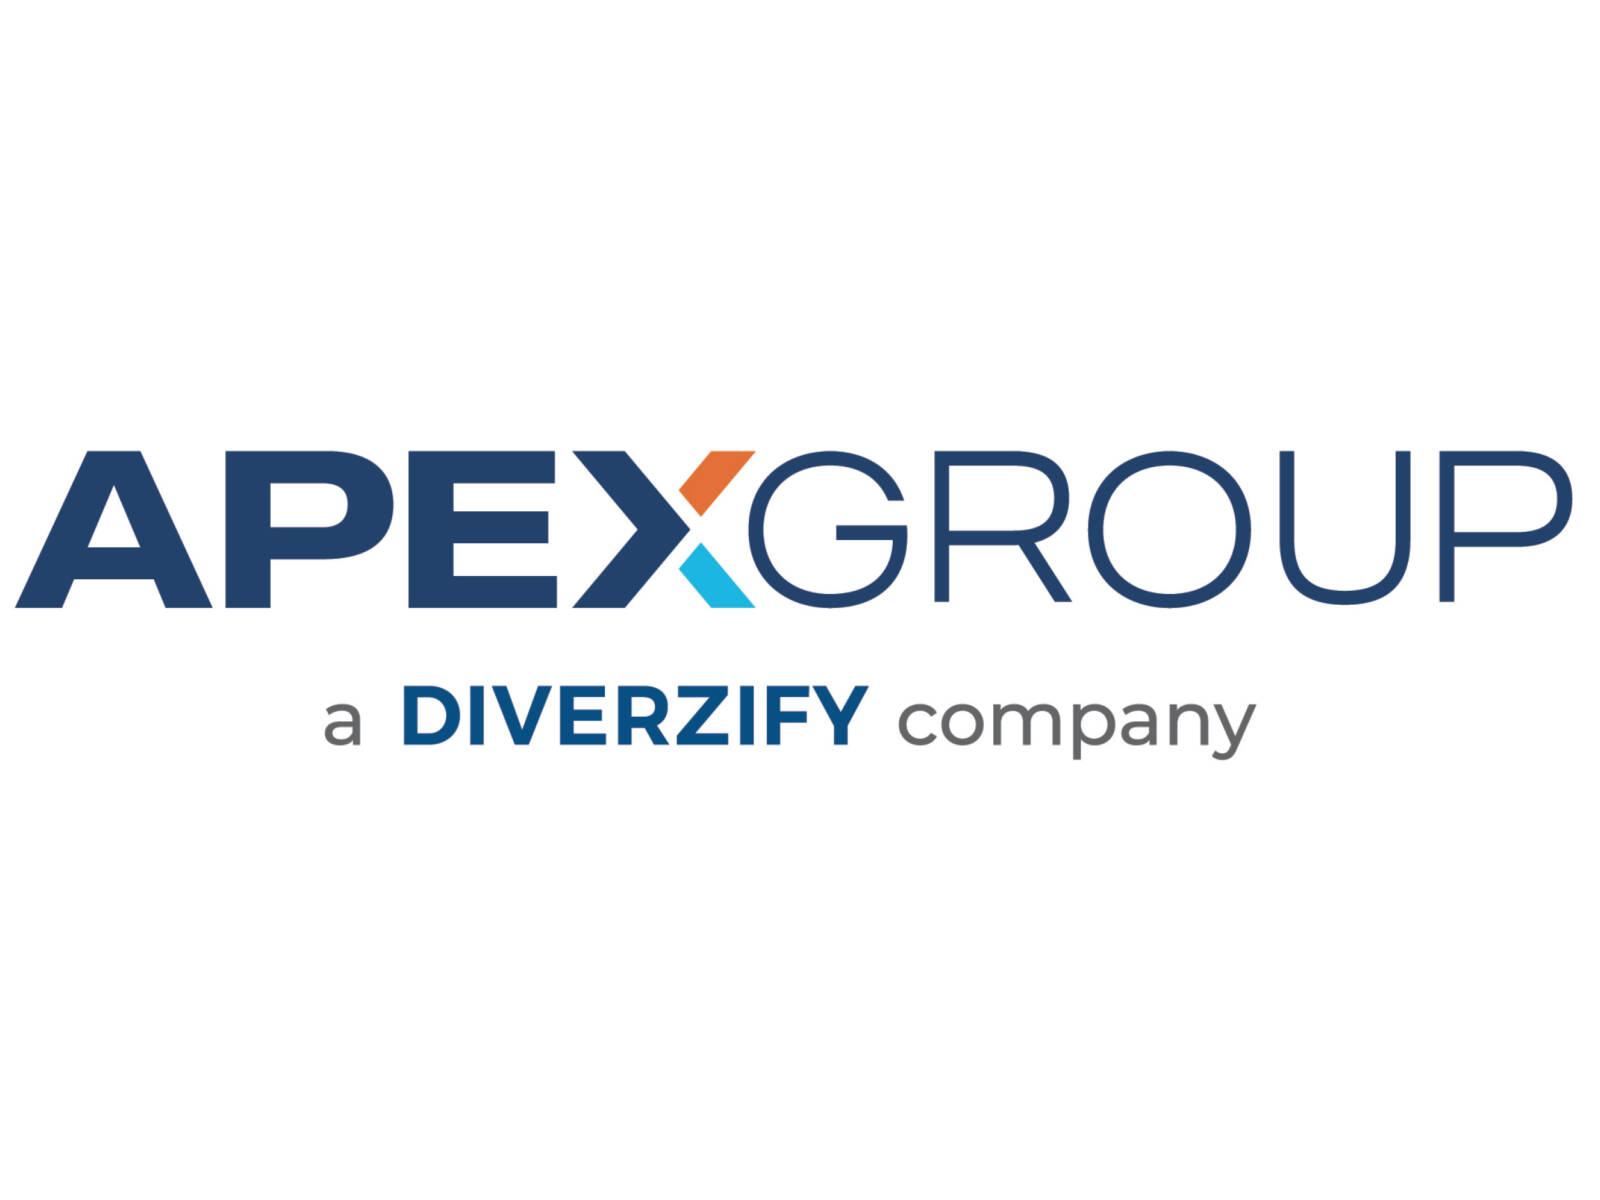 Apex Group logo containing brand title in bolded, blue text with the “x” consisting of a blue, light blue, and orange scheme